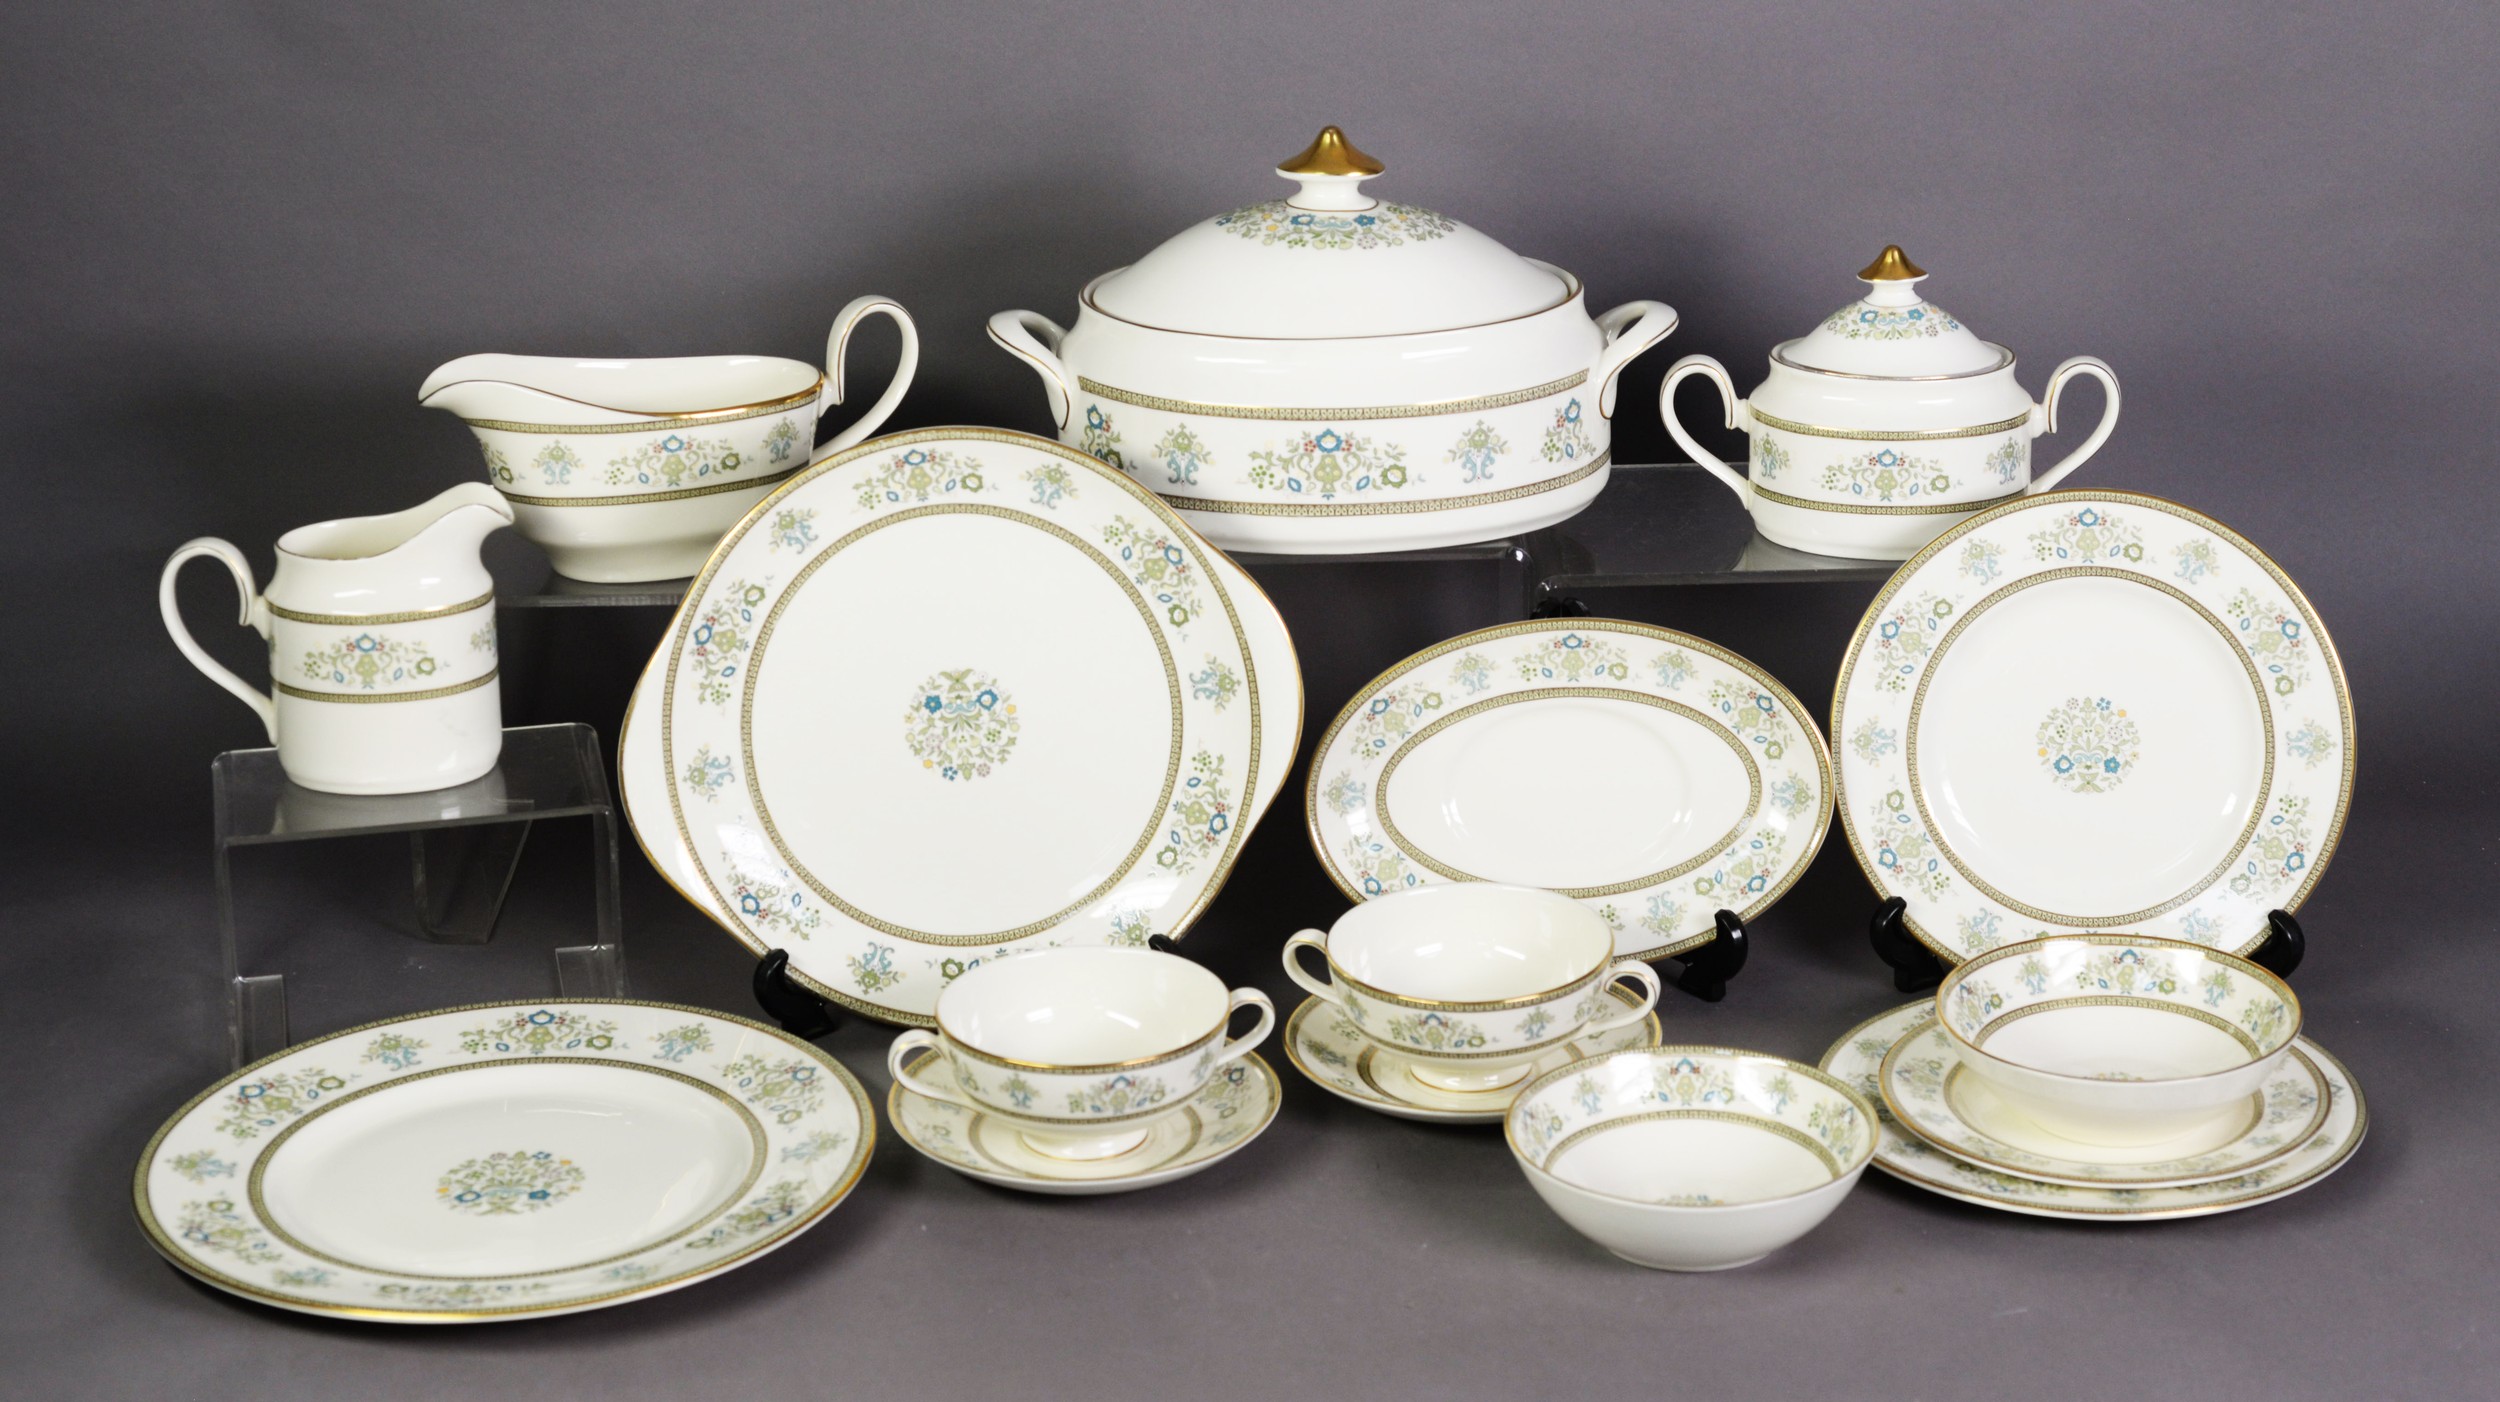 MINTON BONE CHINA ‘HENLEY’ PATTERN DINNER AND TEA SERVICE for twelve persons, approximately 65